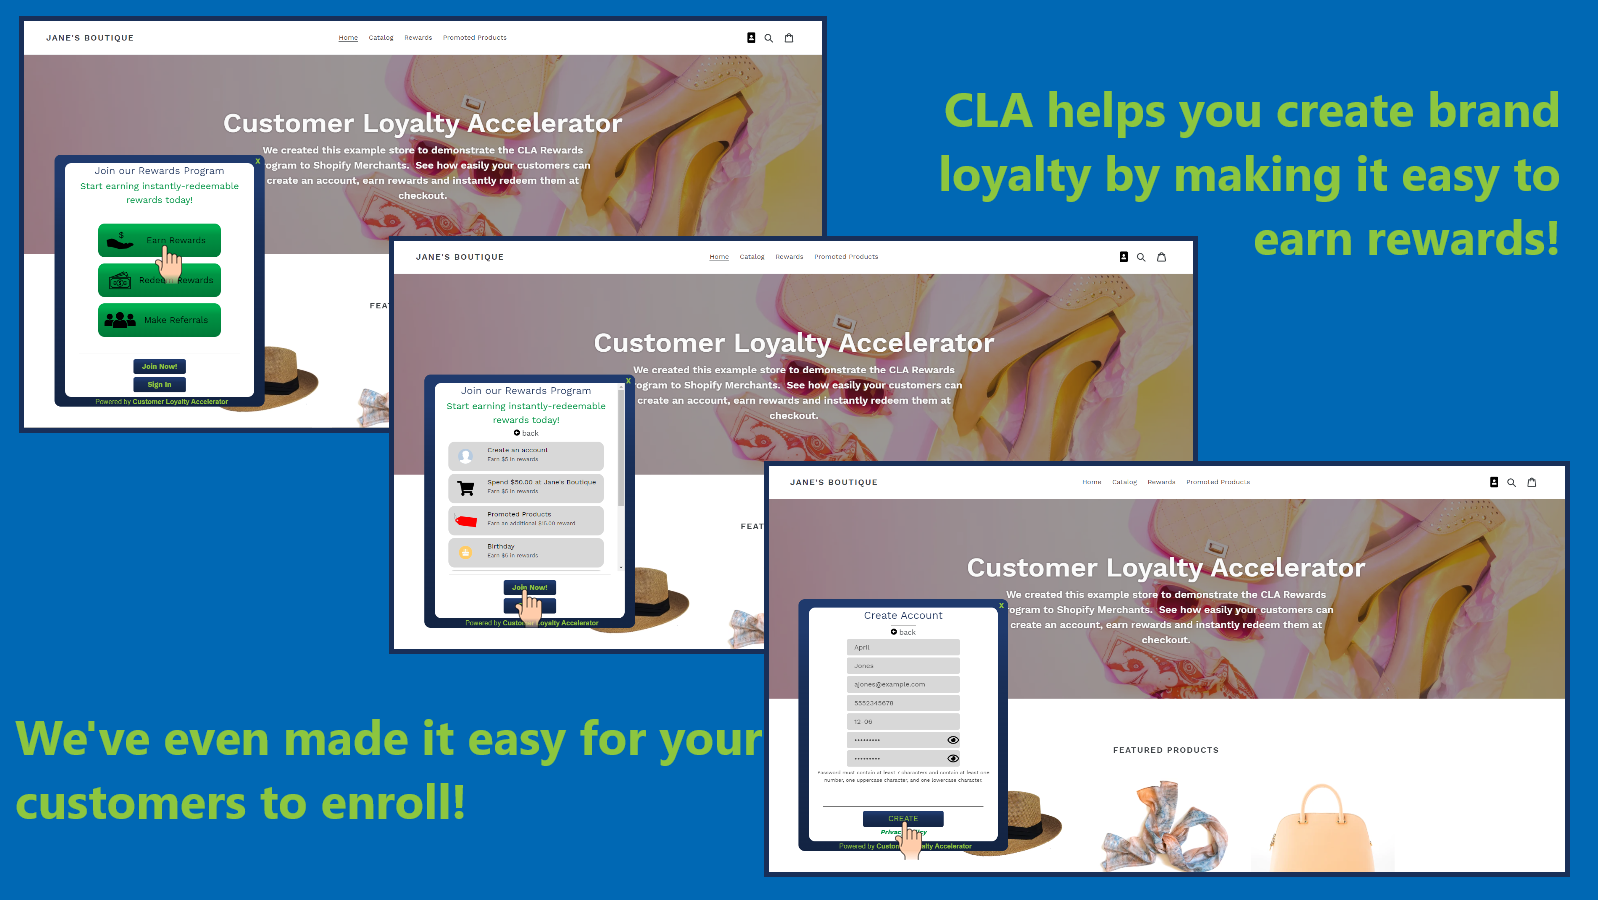 It's easy for customers to enroll & earn rewards in your program